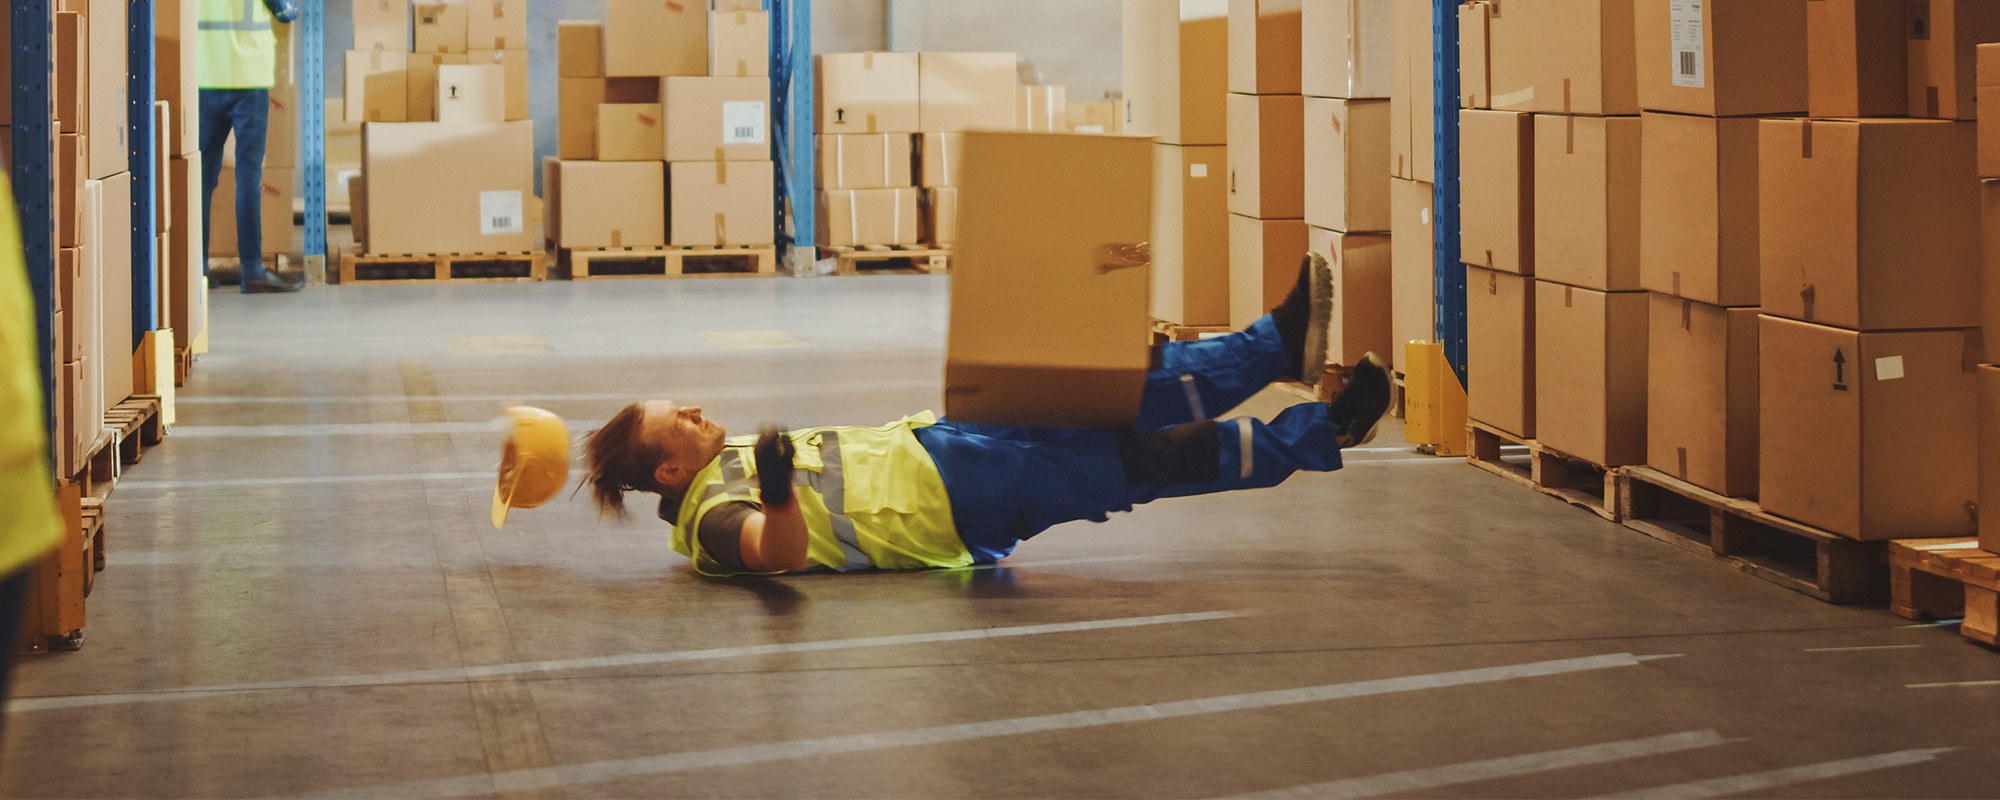 warehouse worker has work related accident falls while trying to pick up cardboard box from the shelf. colleagues call f